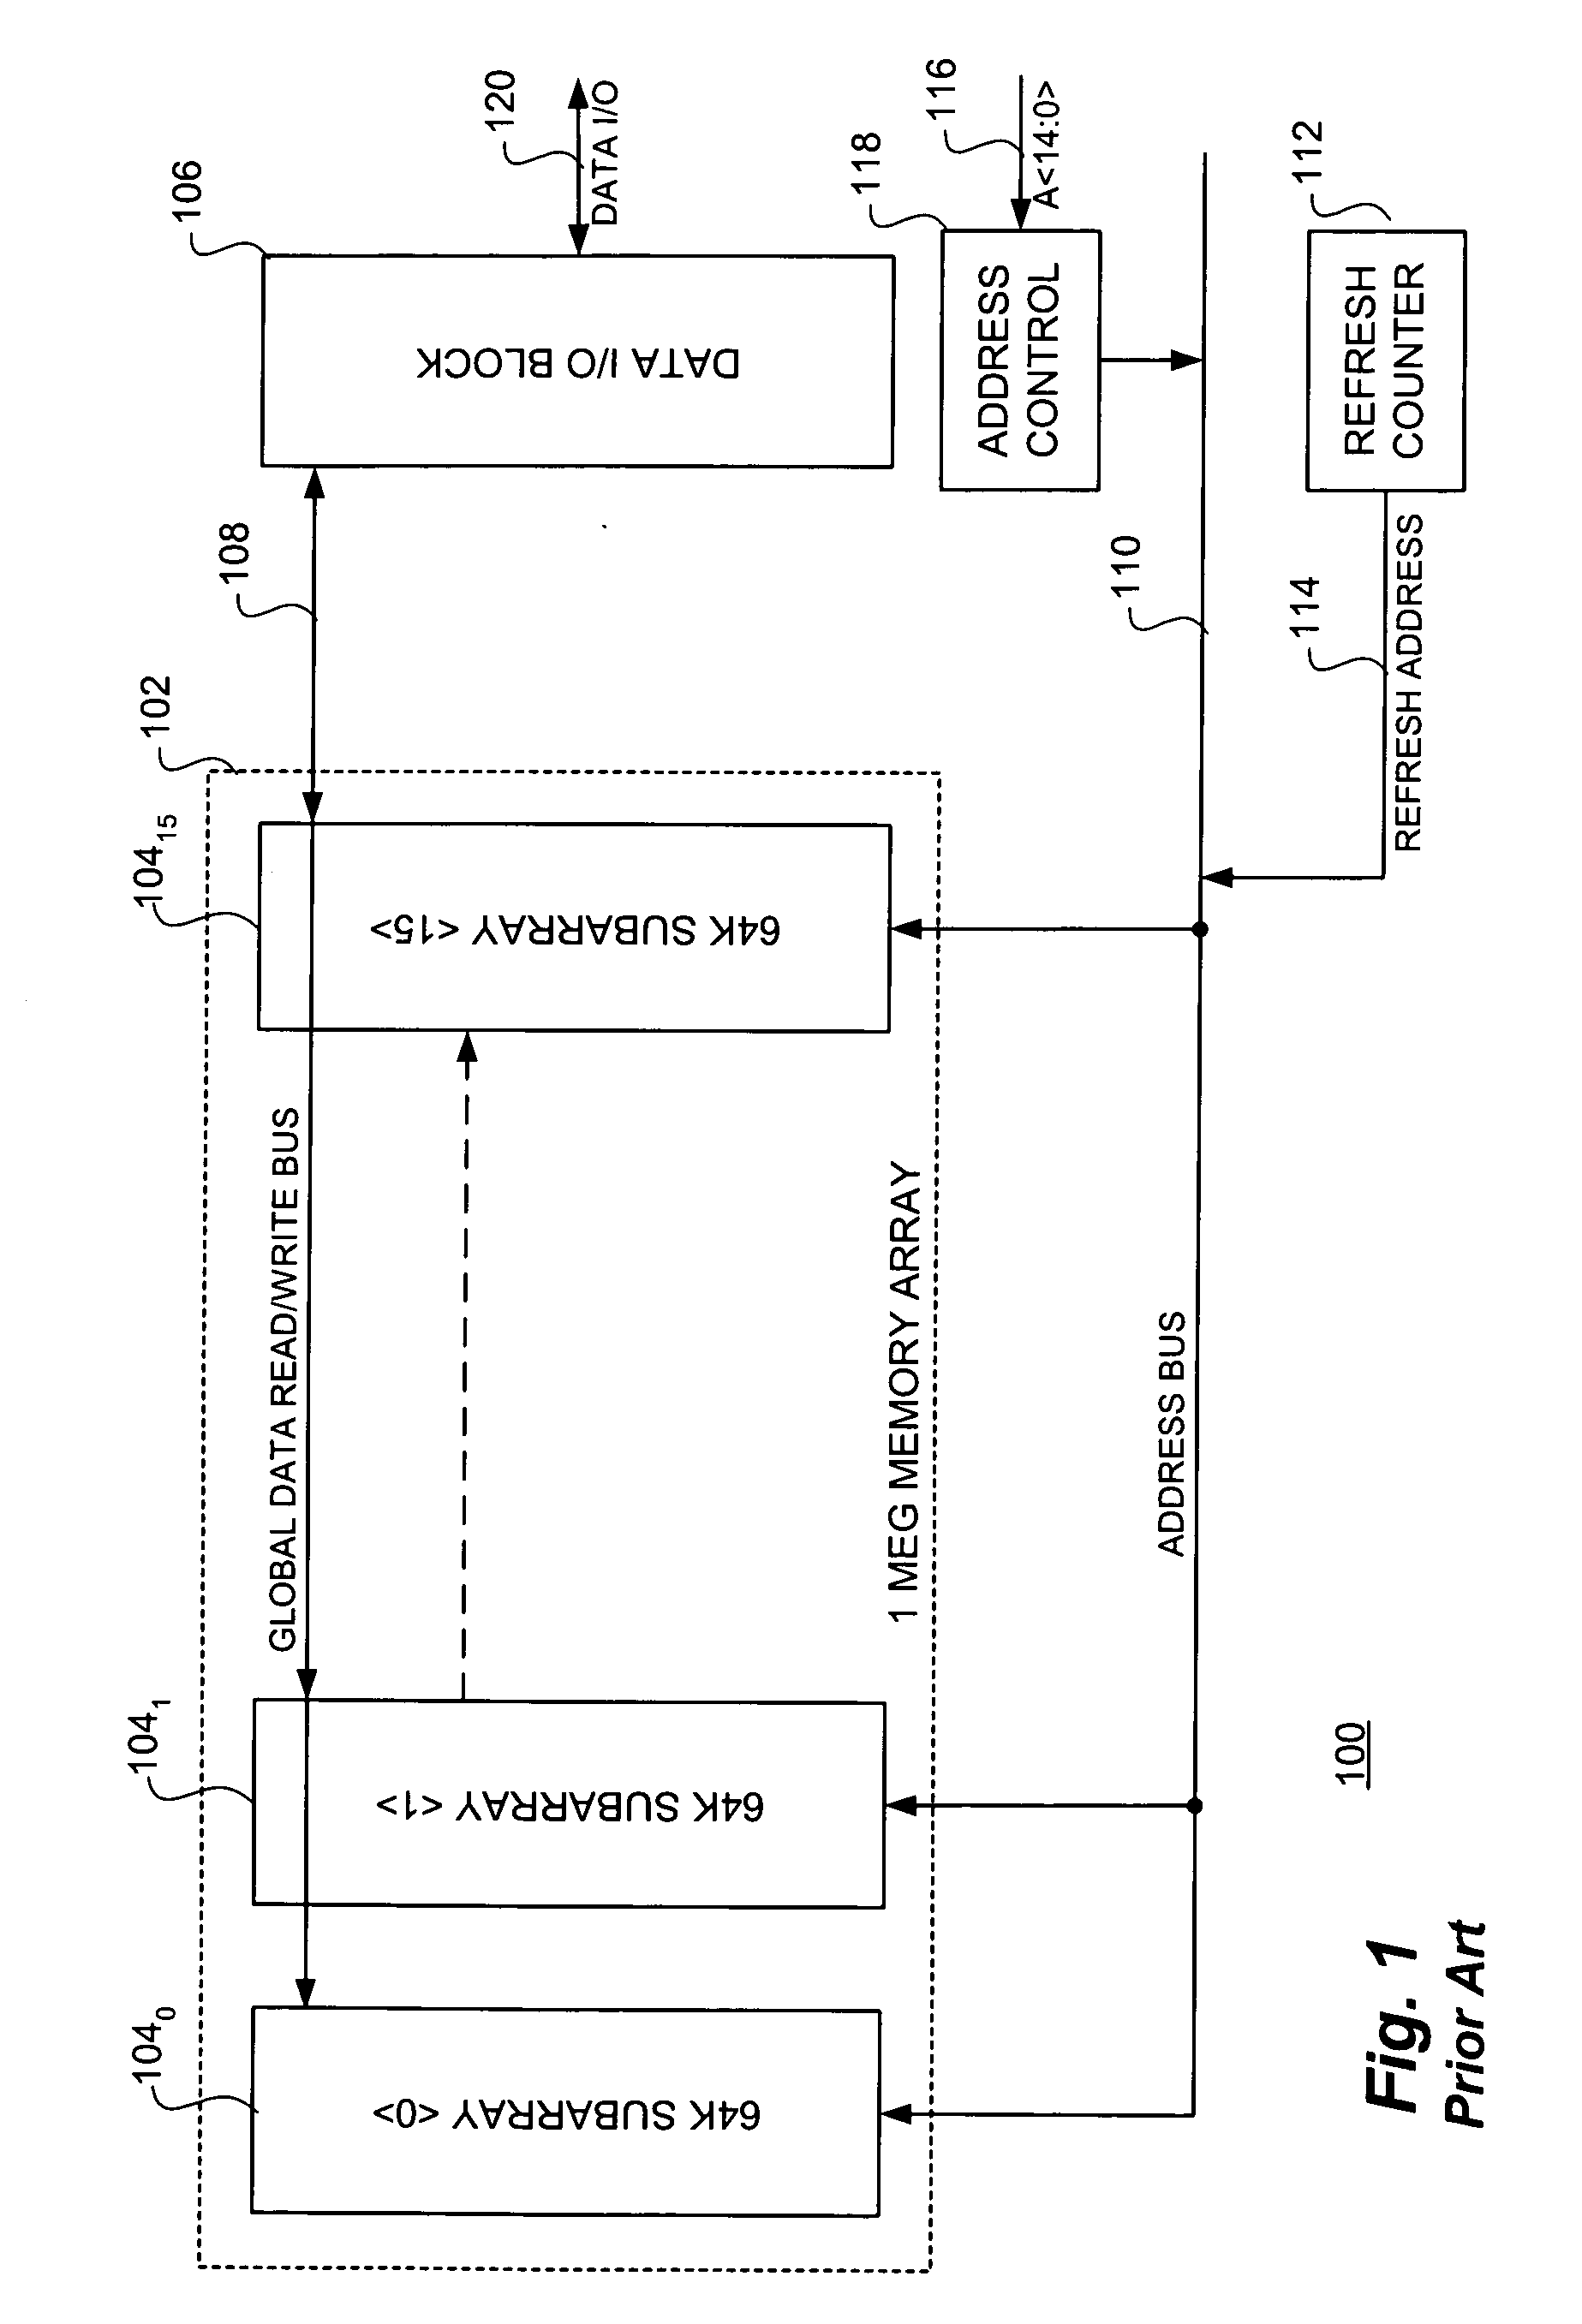 Static random access memory (SRAM) compatible, high availability memory array and method employing synchronous dynamic random access memory (DRAM) in conjunction with a single DRAM cache and tag